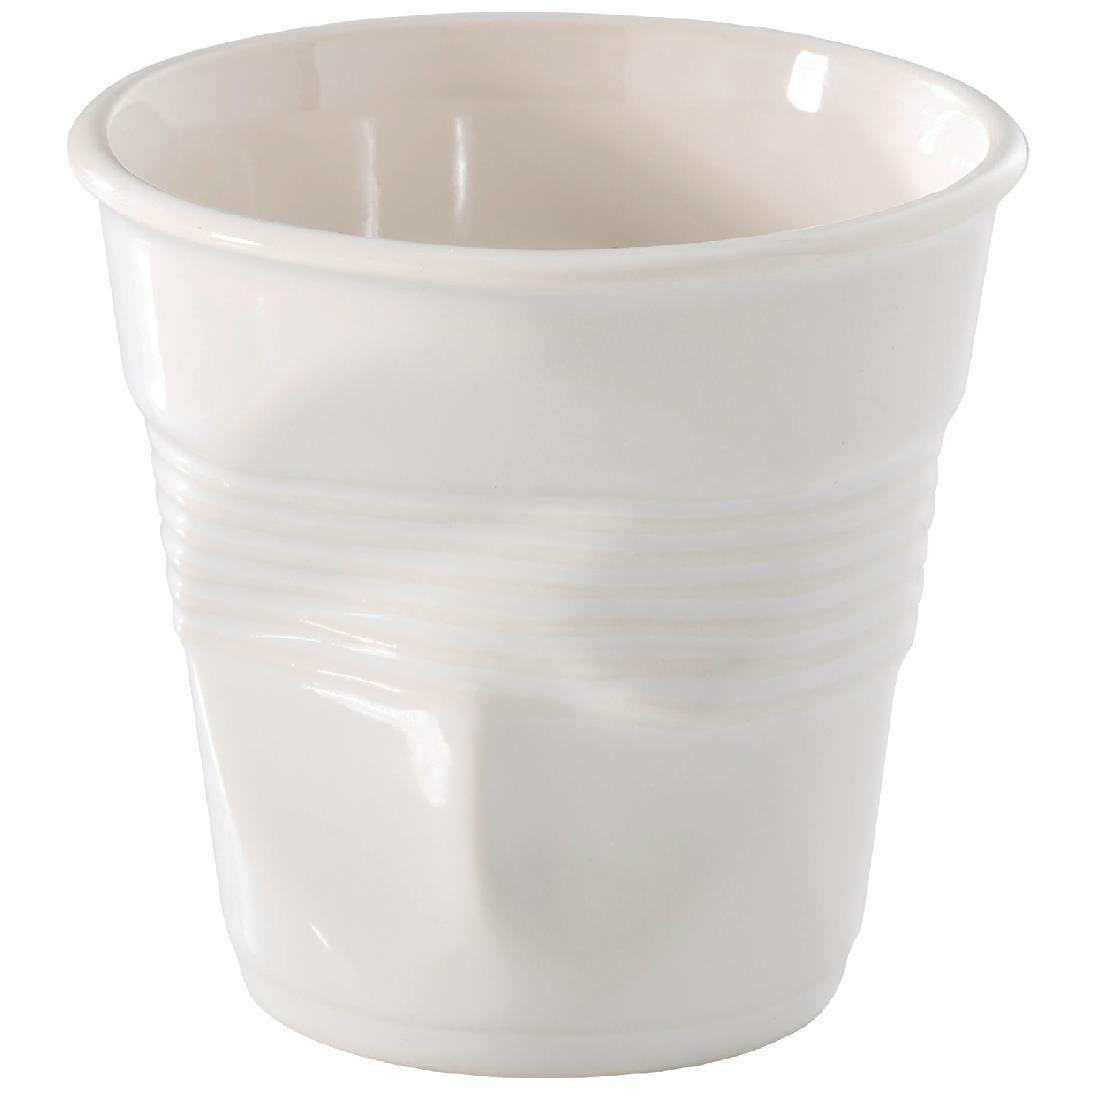 Revol Froisses Cappuccino Tumblers White 180ml (Pack of 6) - DB454  - 1